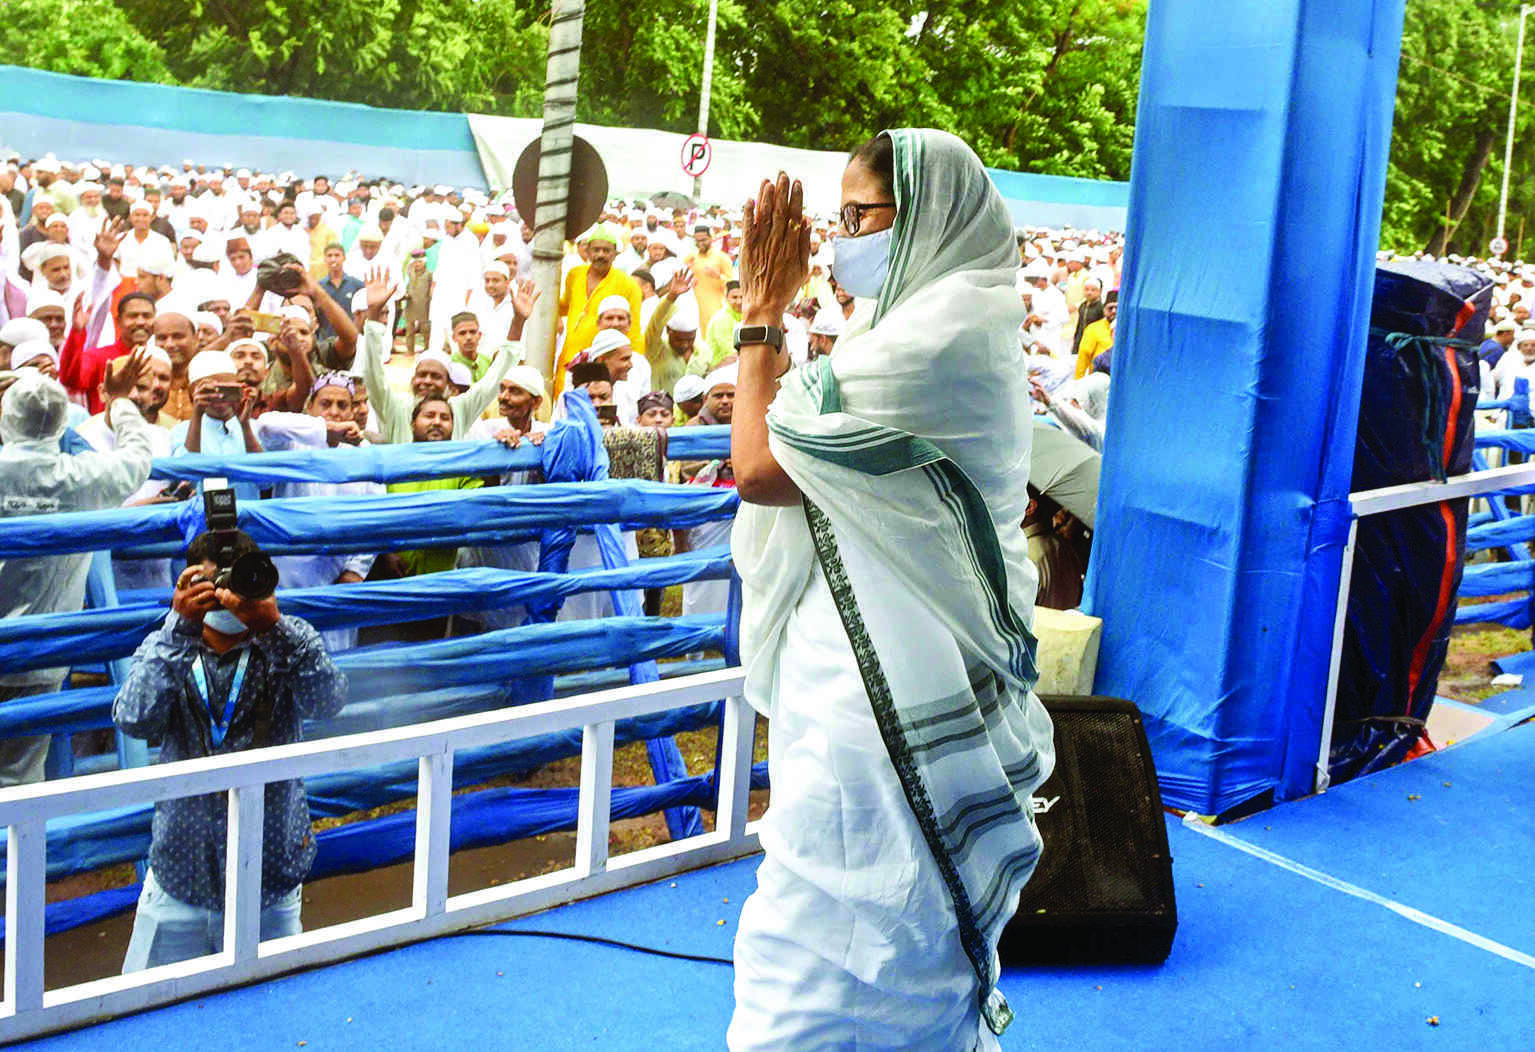 Situation of country grim, politics of isolation not correct, says Mamata